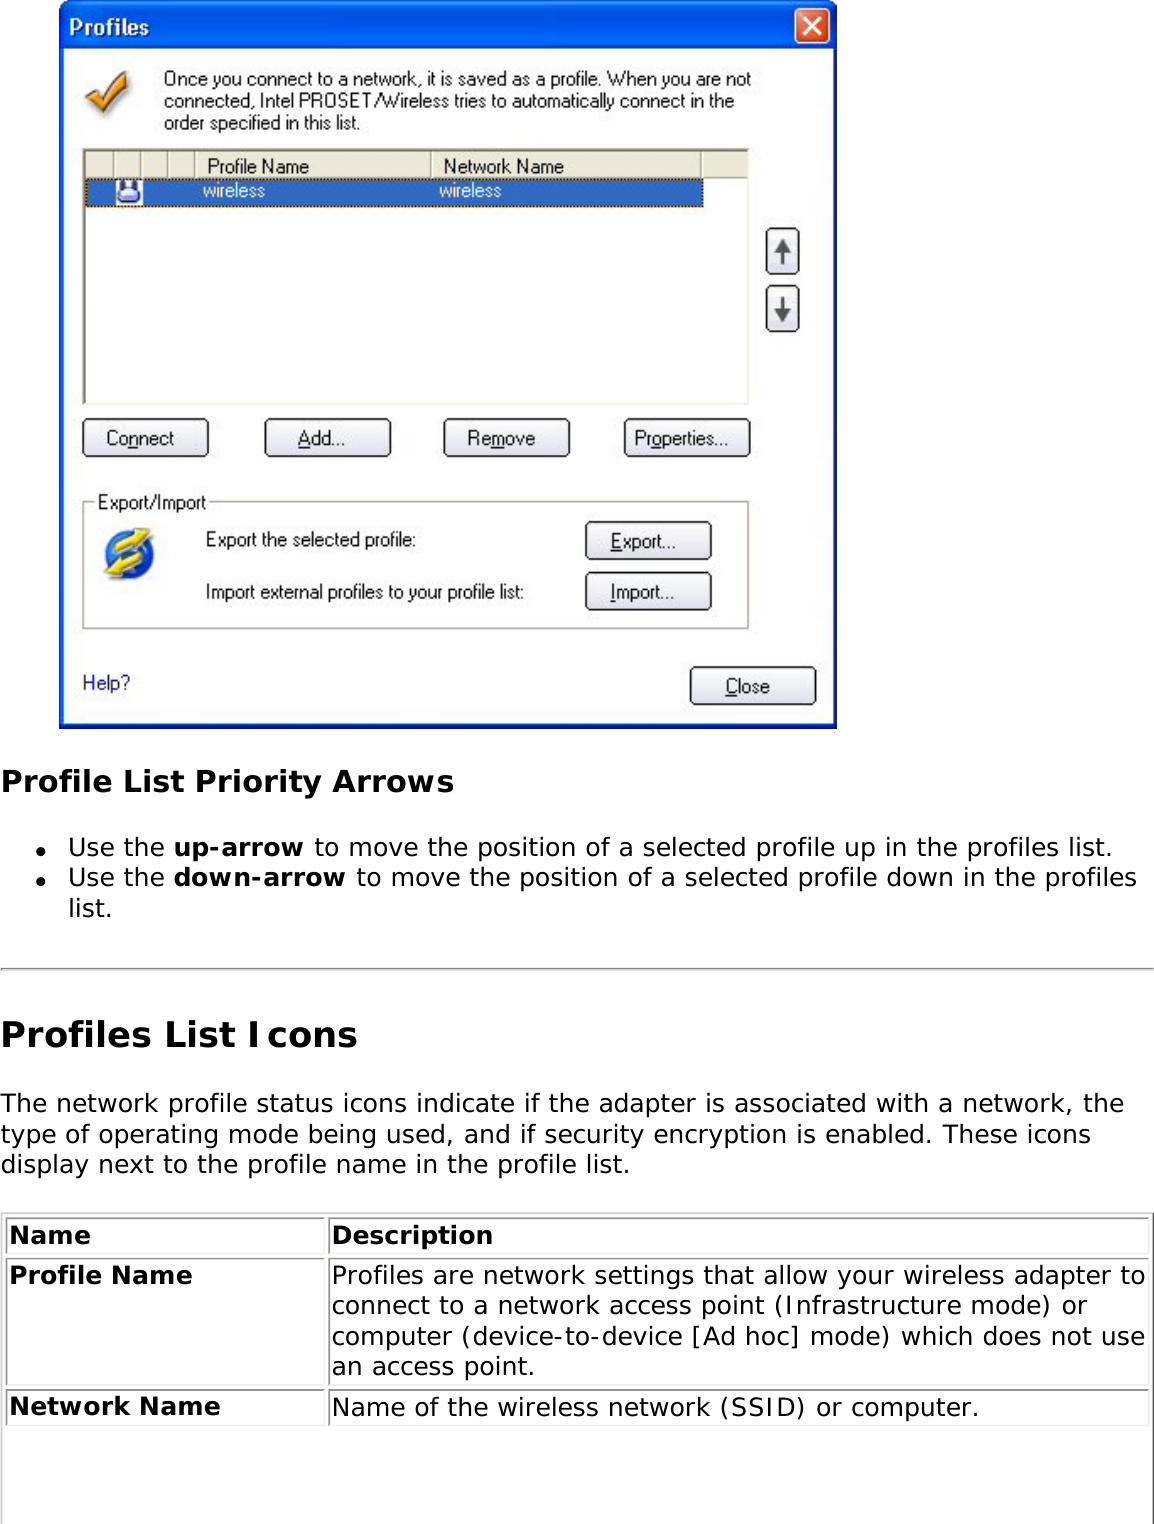  Profile List Priority Arrows●     Use the up-arrow to move the position of a selected profile up in the profiles list.●     Use the down-arrow to move the position of a selected profile down in the profiles list.Profiles List Icons The network profile status icons indicate if the adapter is associated with a network, the type of operating mode being used, and if security encryption is enabled. These icons display next to the profile name in the profile list. Name DescriptionProfile Name Profiles are network settings that allow your wireless adapter to connect to a network access point (Infrastructure mode) or computer (device-to-device [Ad hoc] mode) which does not use an access point. Network Name Name of the wireless network (SSID) or computer.